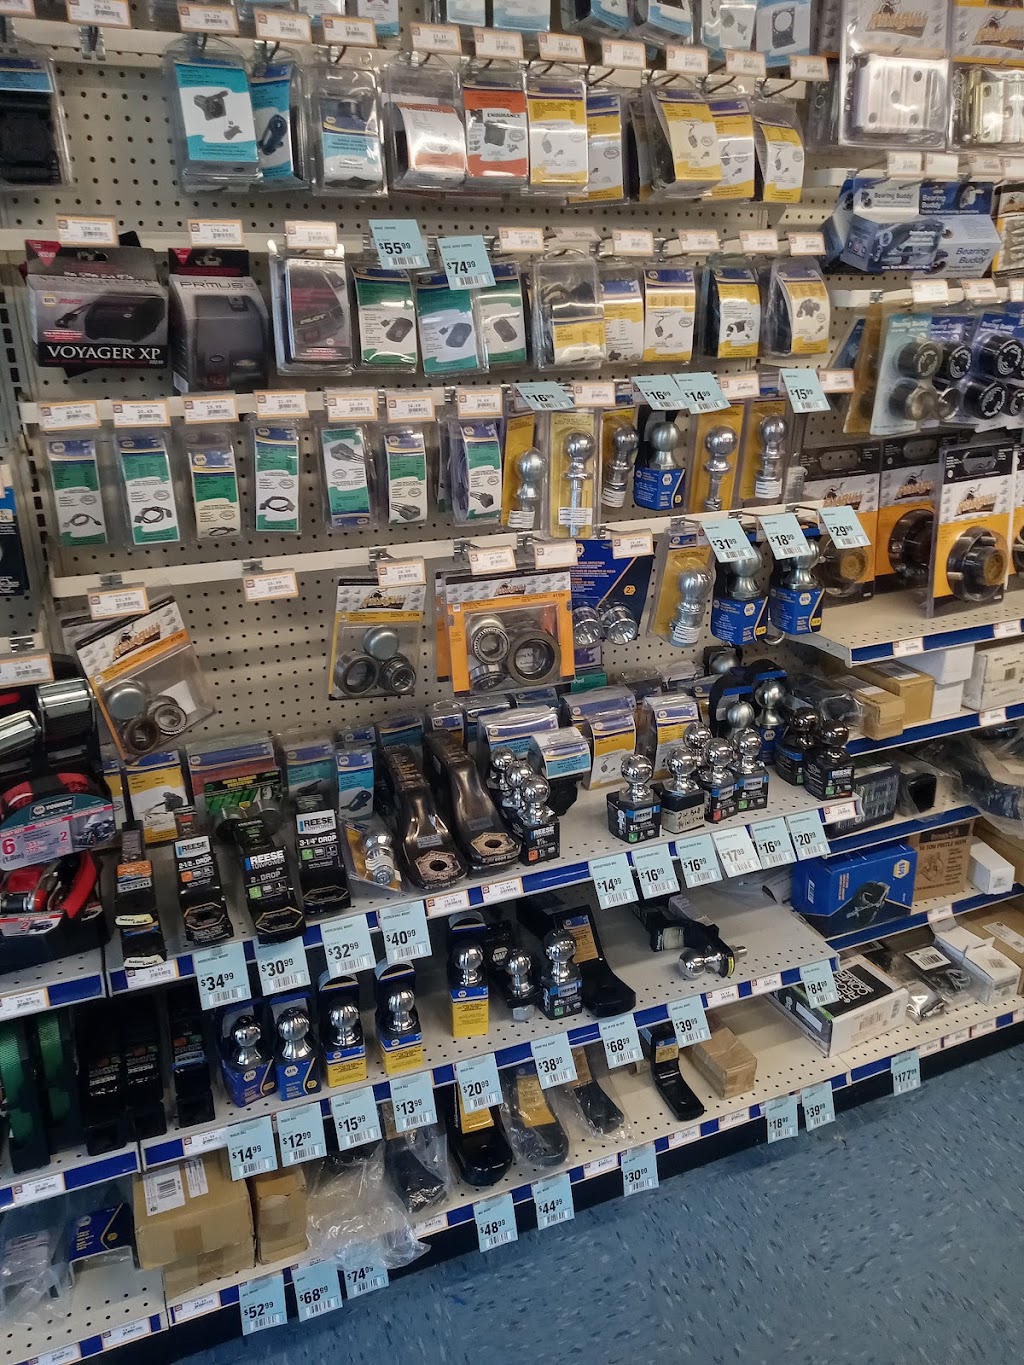 NAPA Auto Parts | 1260 Newfield St, Middletown, CT 06457 | Phone: (860) 635-3055